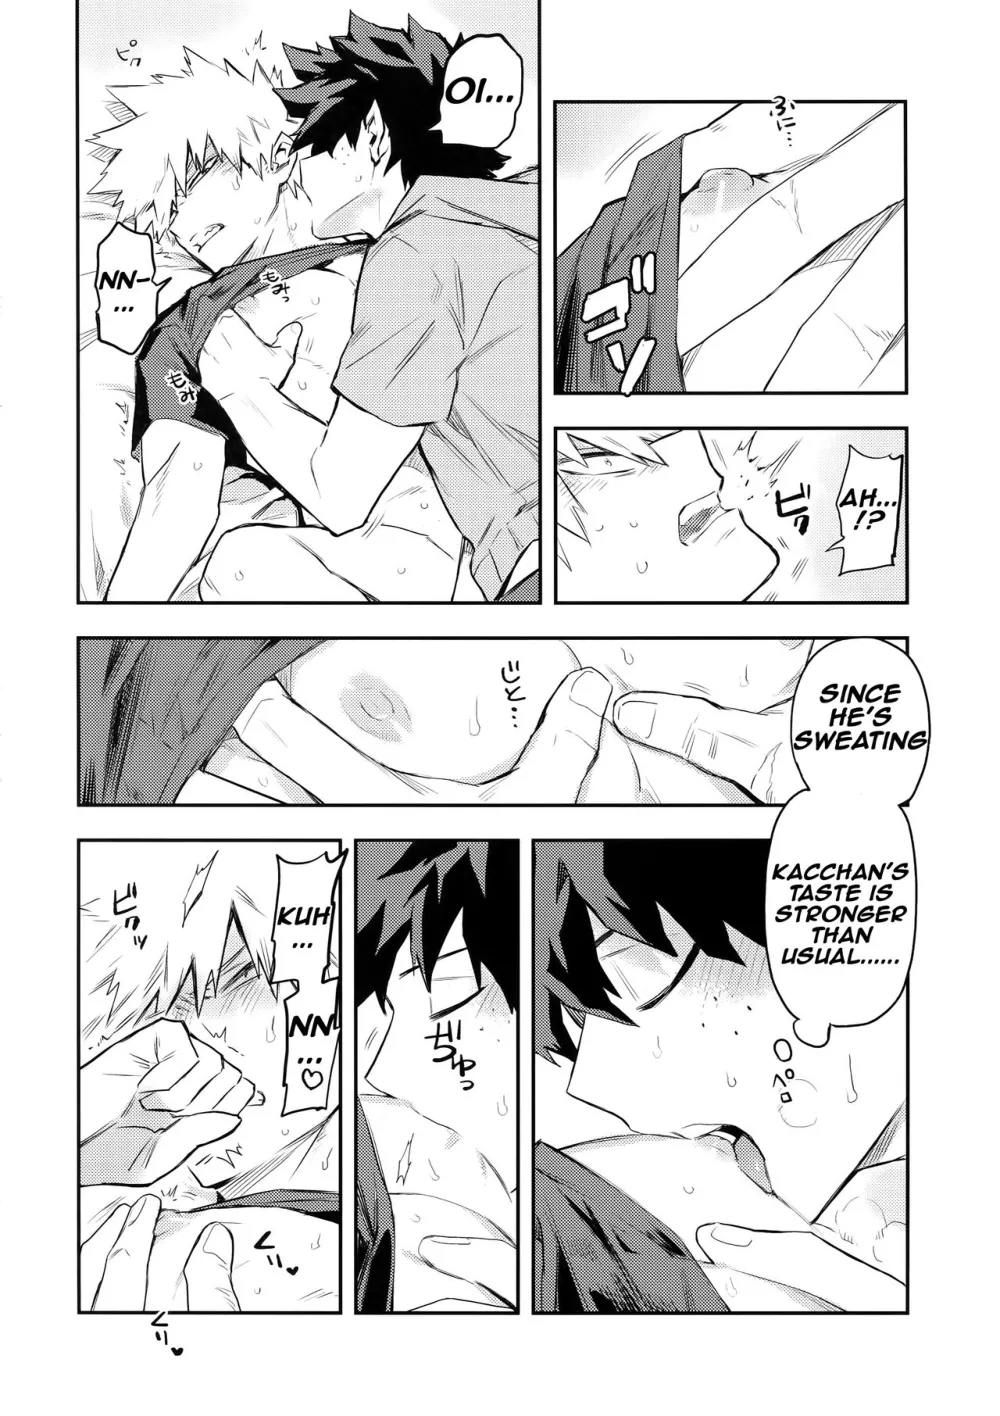 The Battle Between Sick Kacchan and Me - Page 13